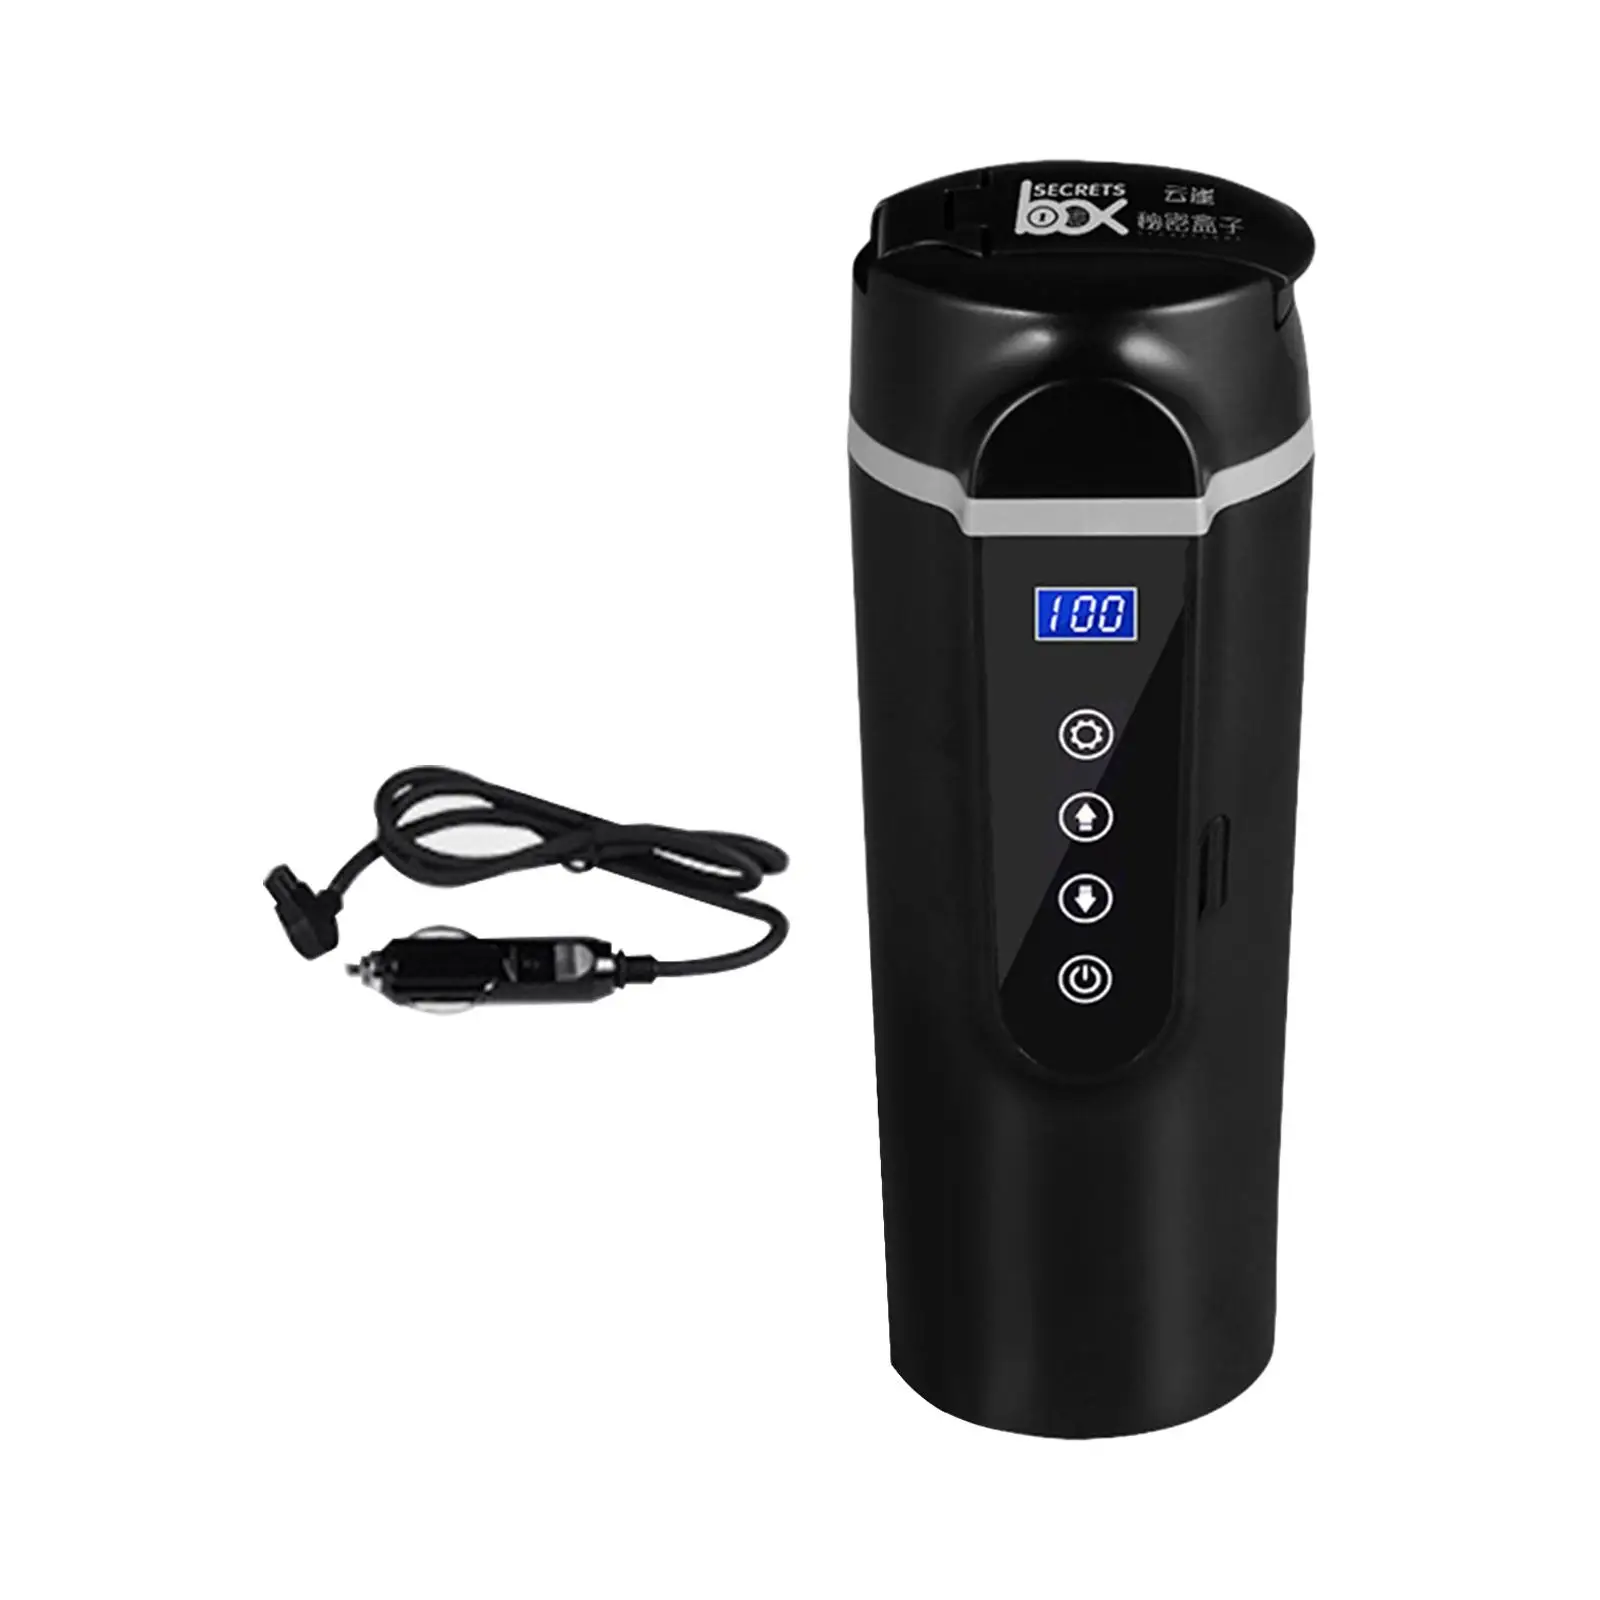 Electric Tea Kettle Smart Travel Coffee Mug for Car Truck Vehicles Camping